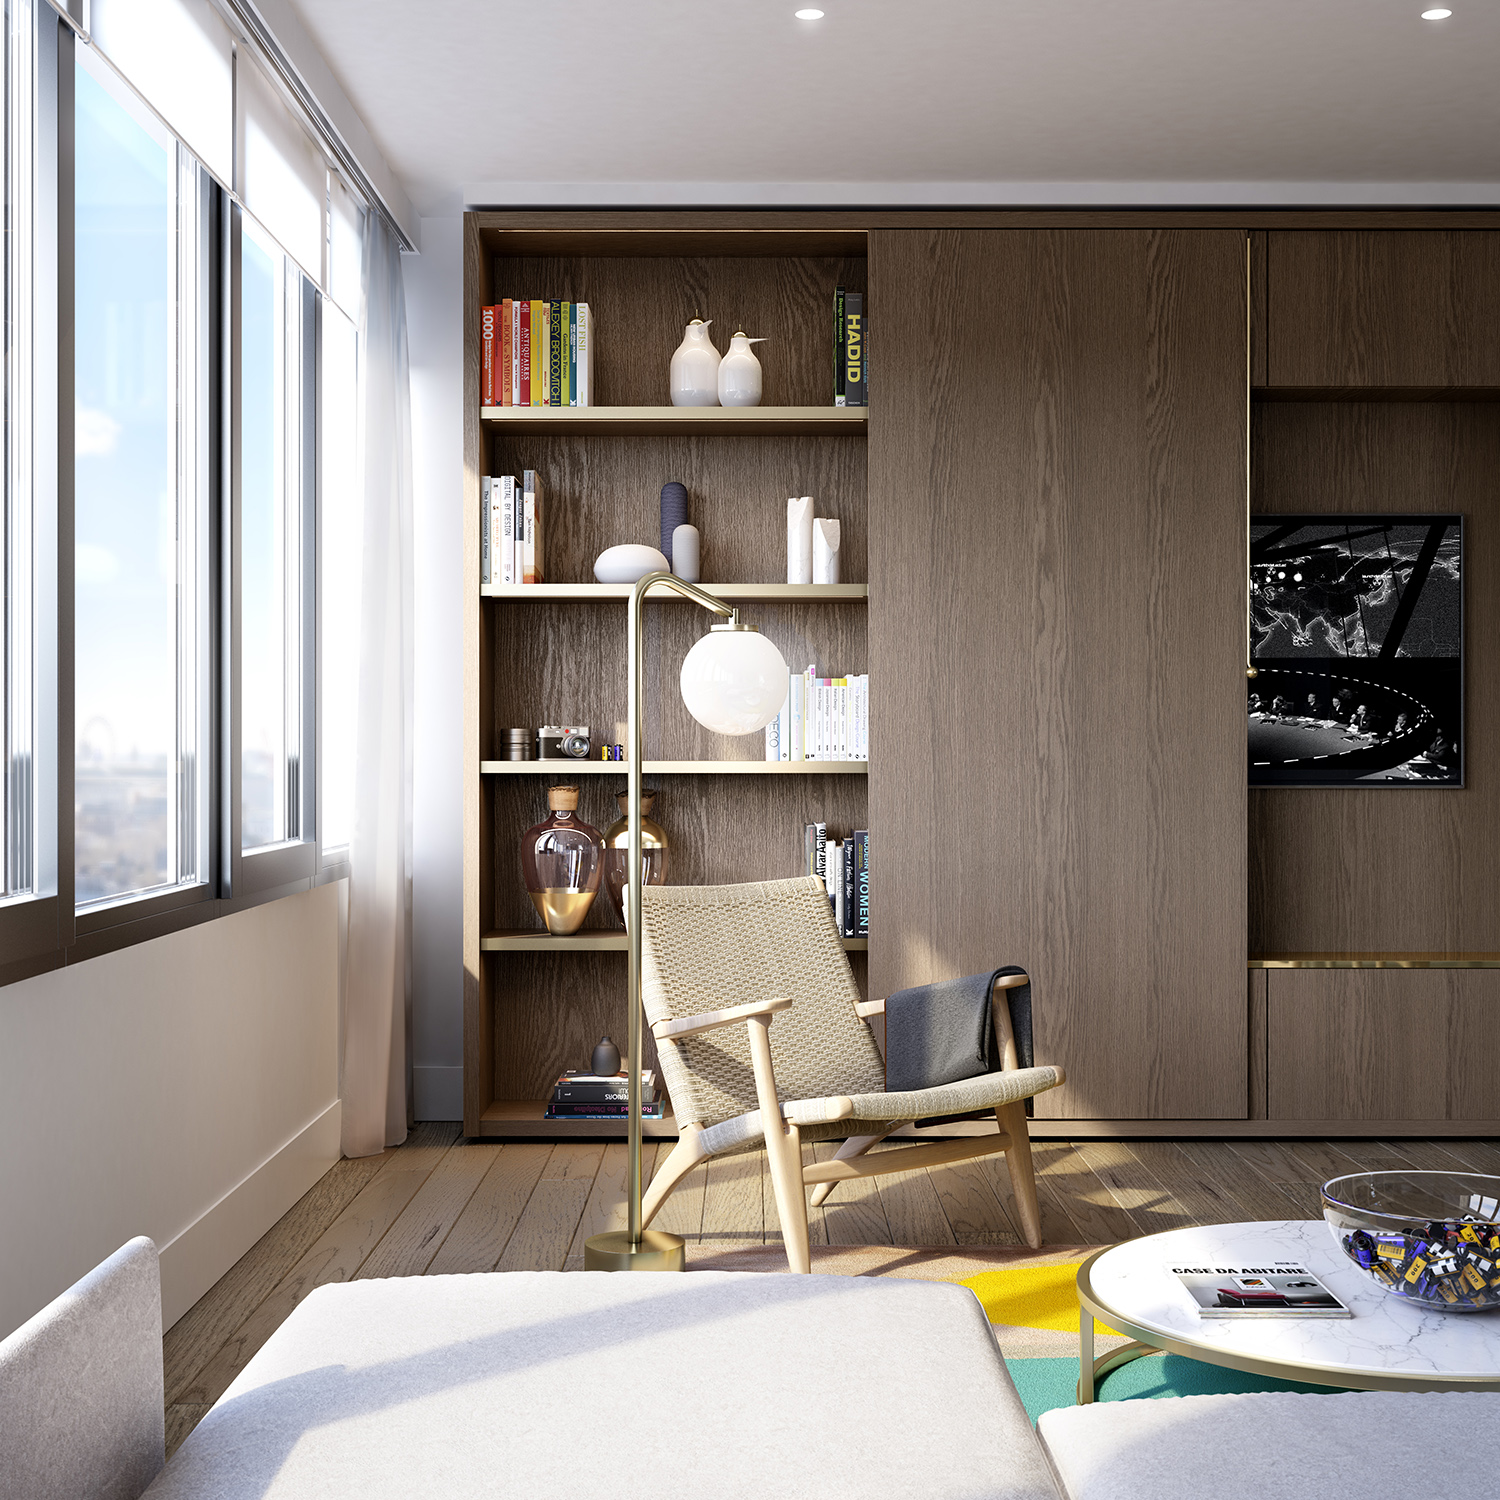 Interiors conceived by Conran & Partners for Blake Tower apartments